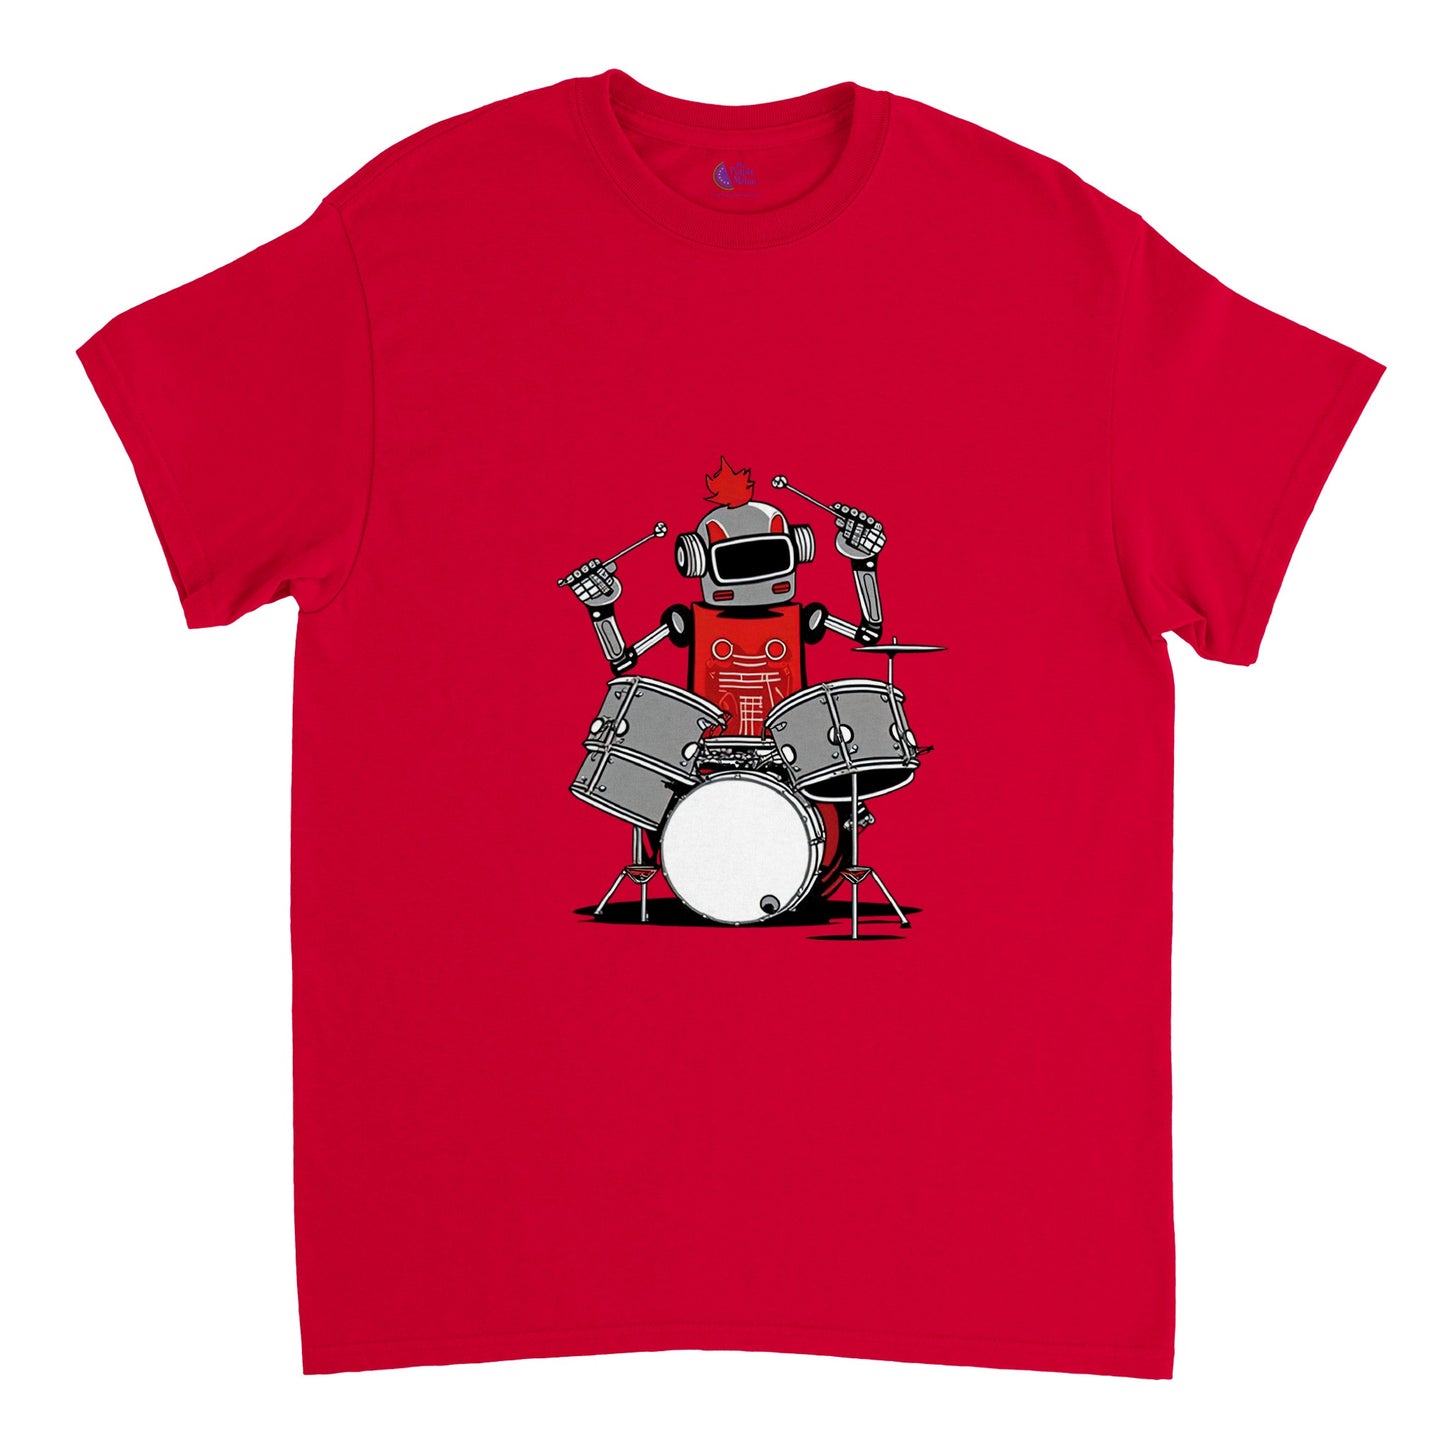 Red t-shirt with a robot playing the drums graphic